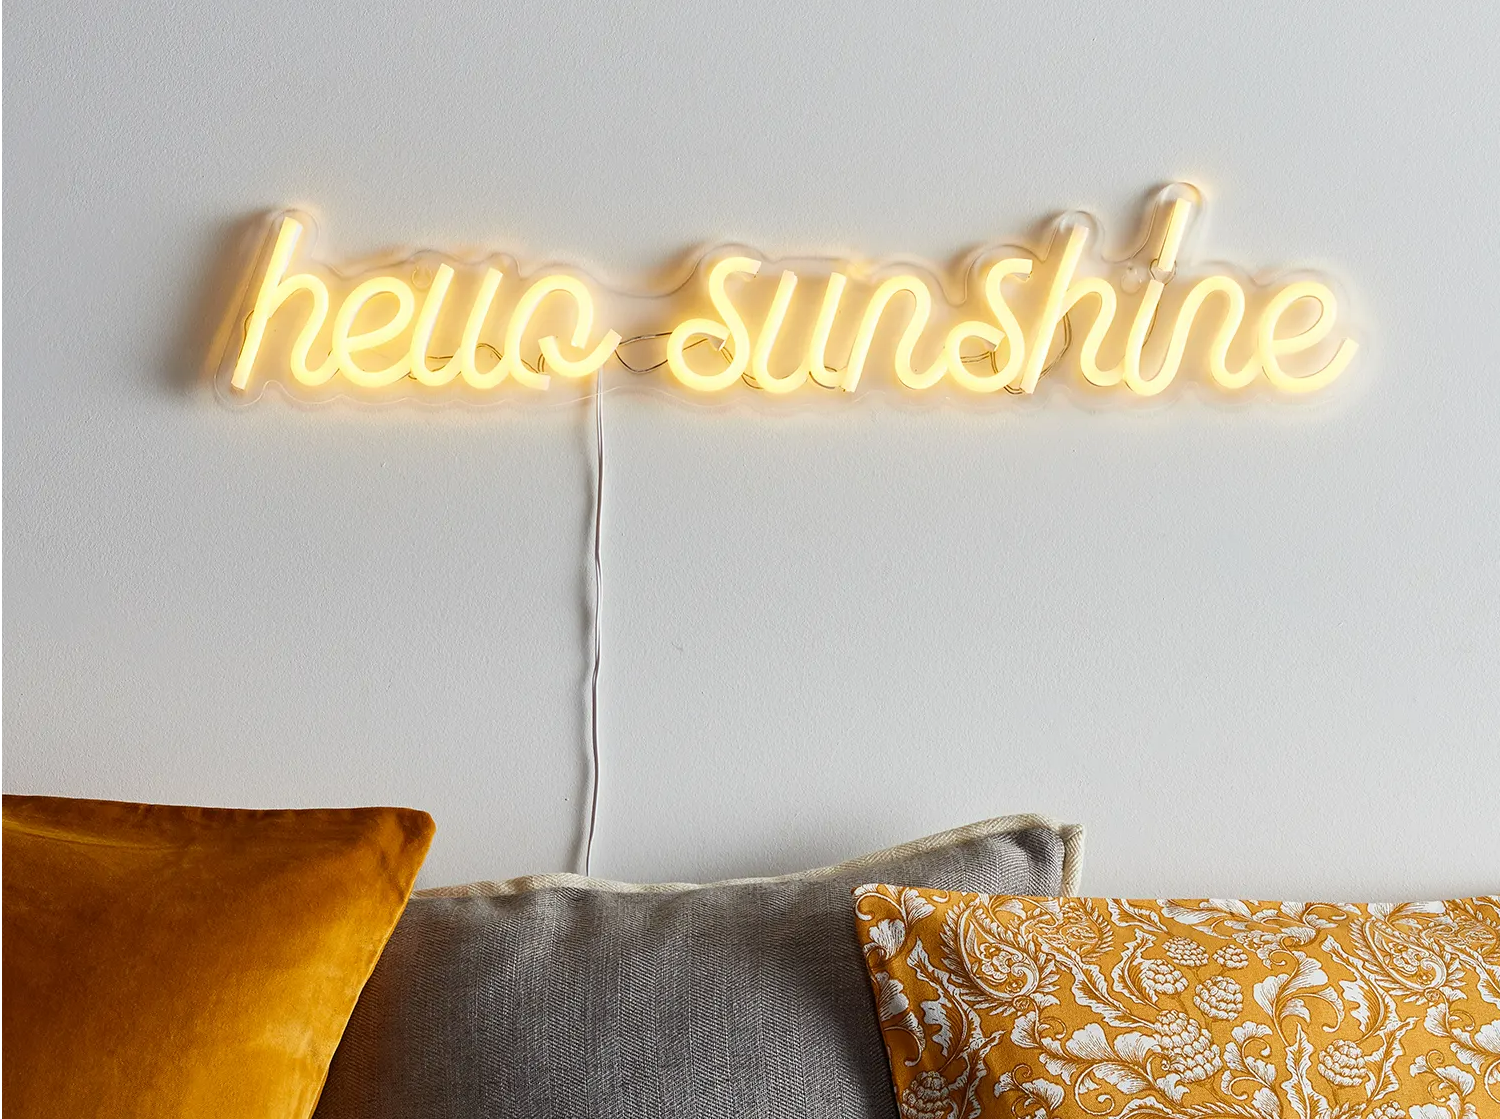 Neon 'hello sunshine' wall sign above some yellow and grey cushions.